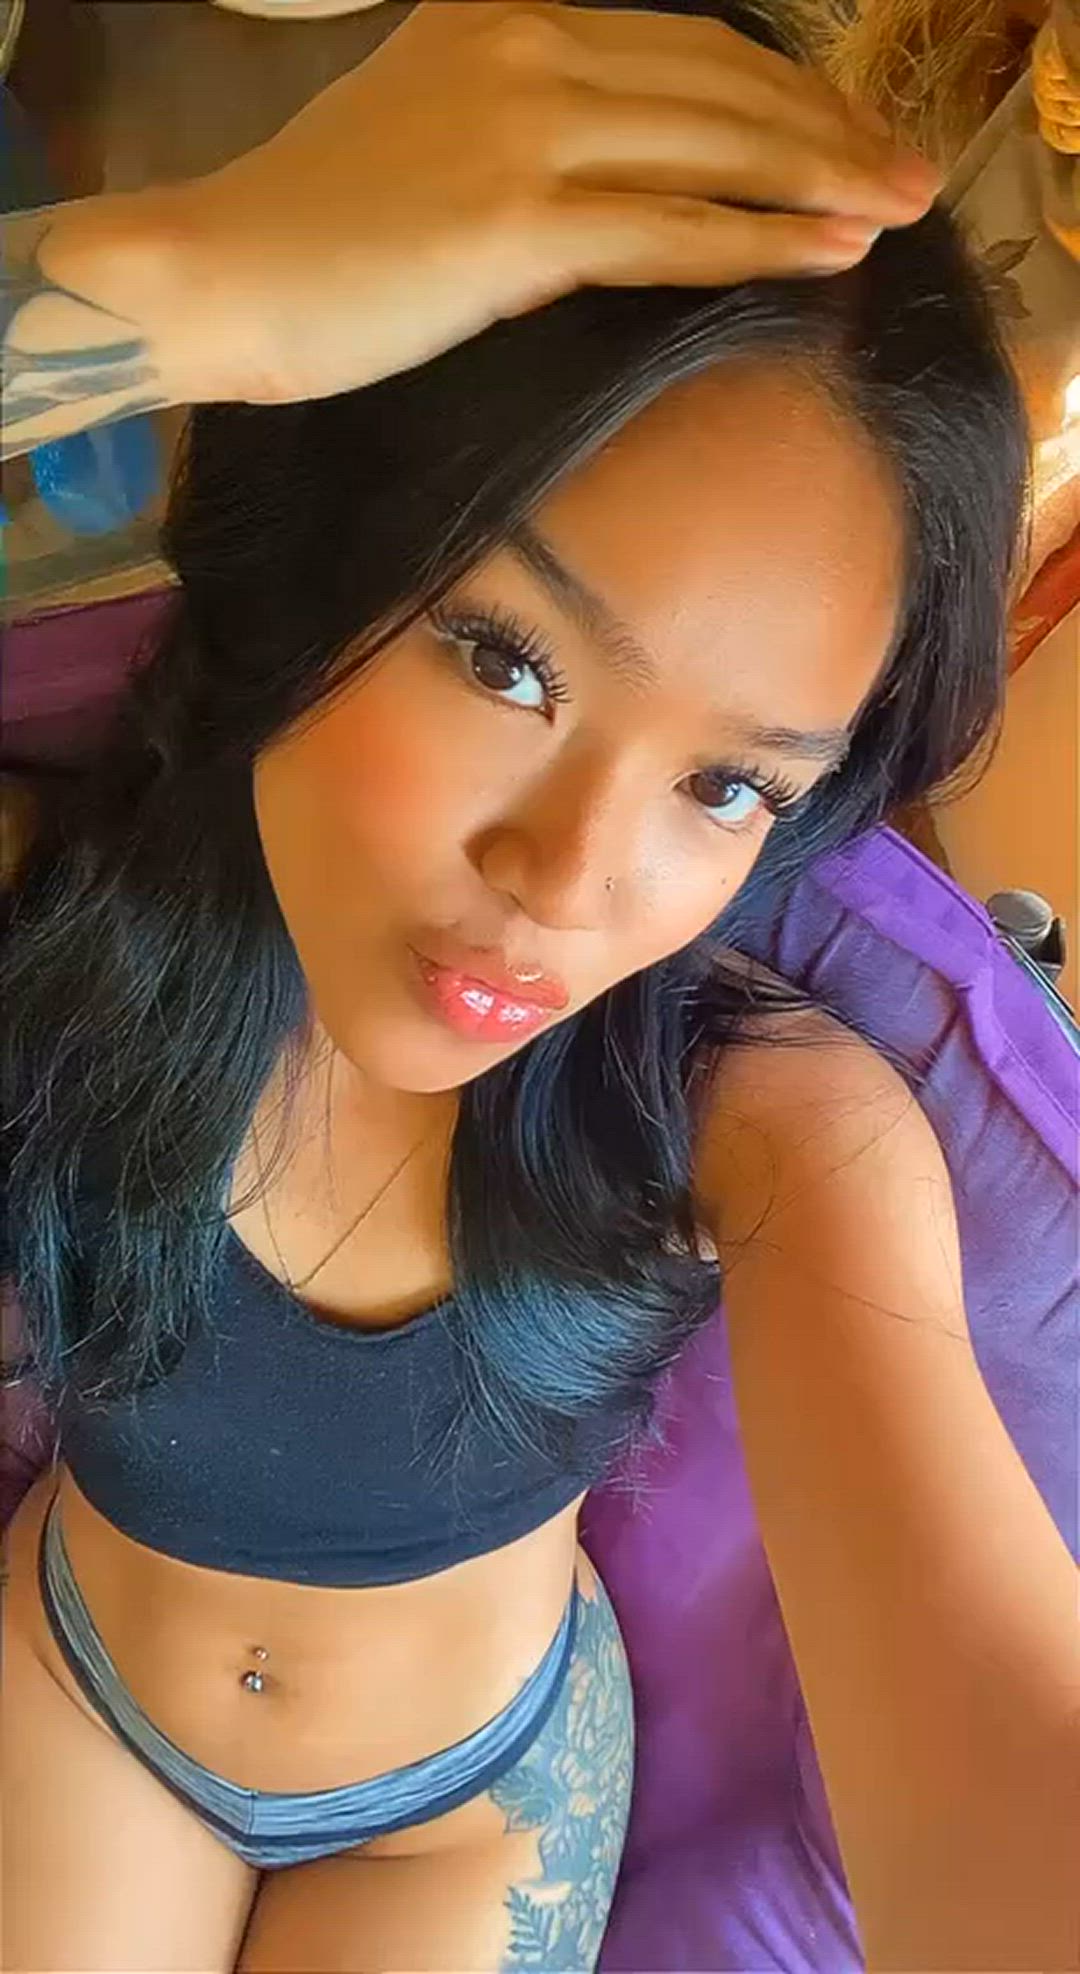 Asian porn video with onlyfans model daddykira <strong>@iworshipkira</strong>